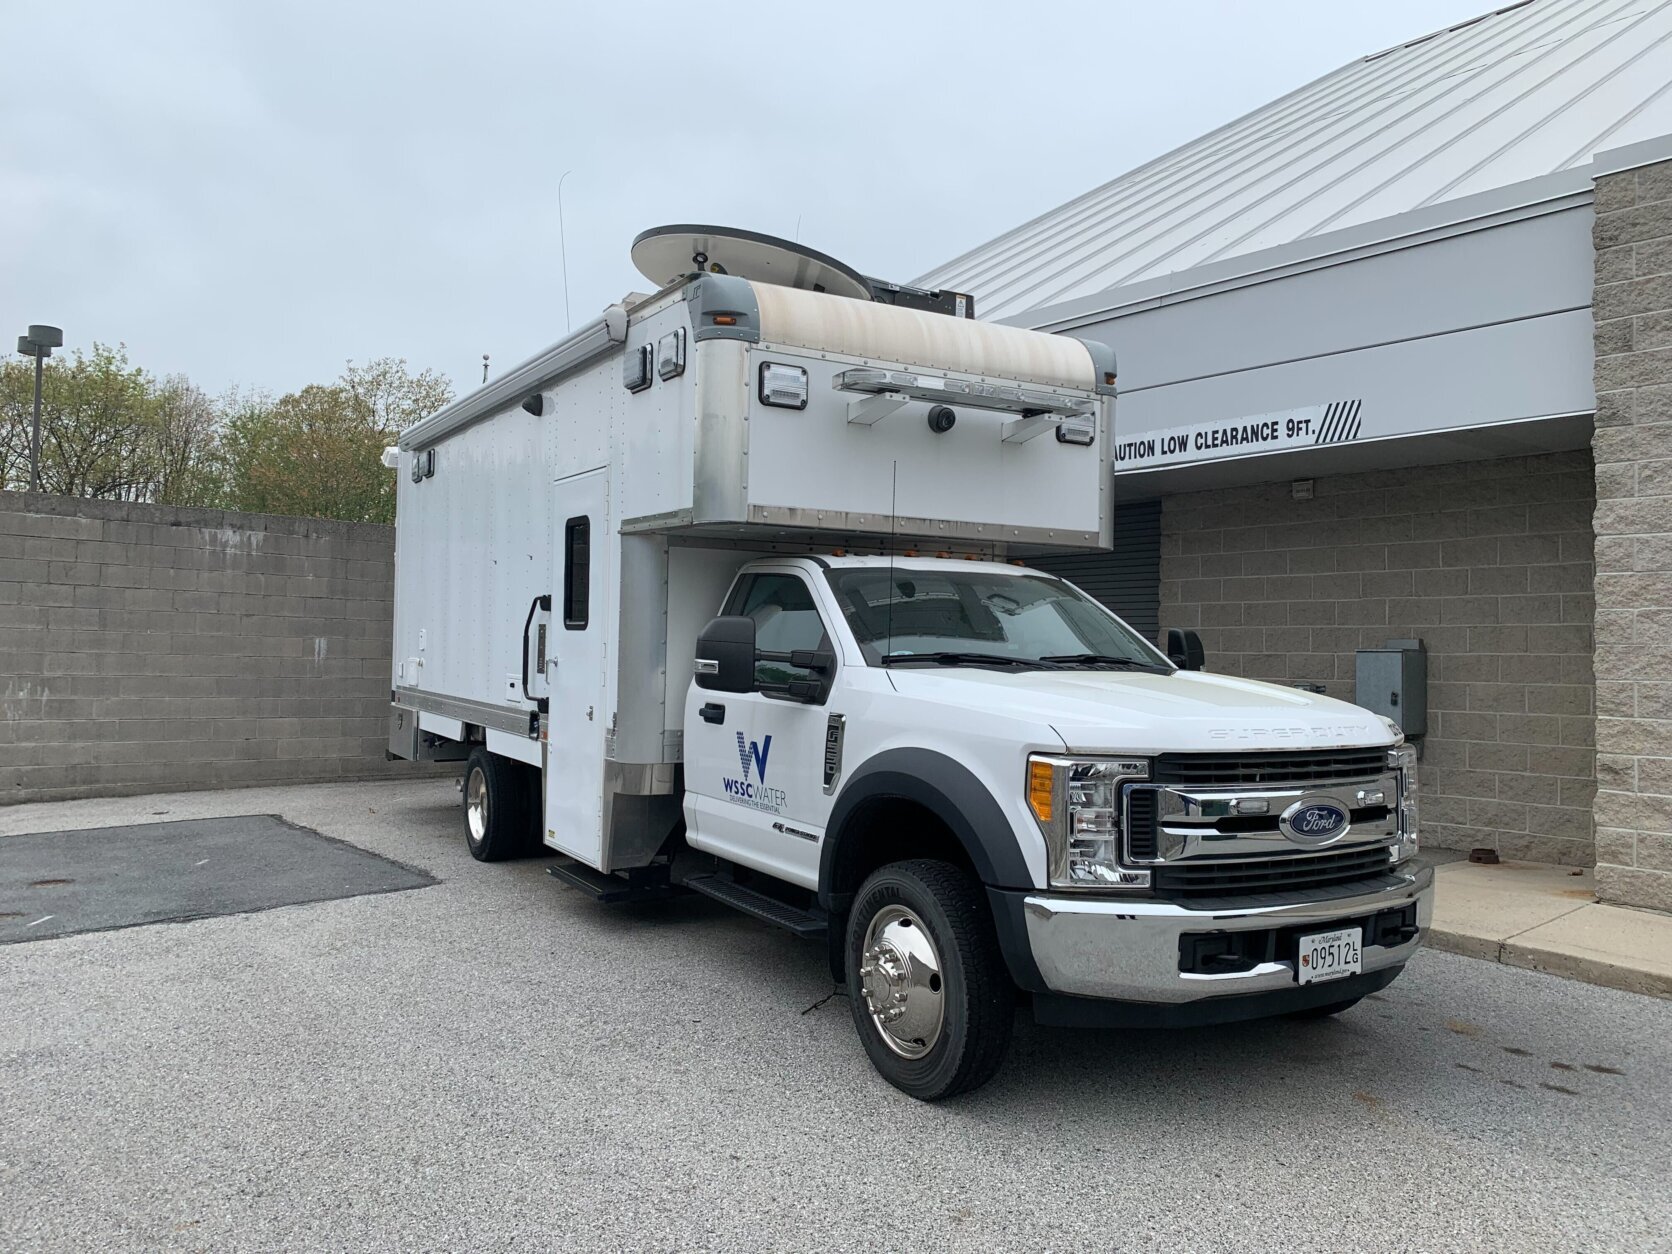 A new truck that can do more water testing at suspected spill sites is stationed outside of the Washington Suburban Sanitary Commission Water Consolidated Laboratory Facility in Laurel, Maryland.